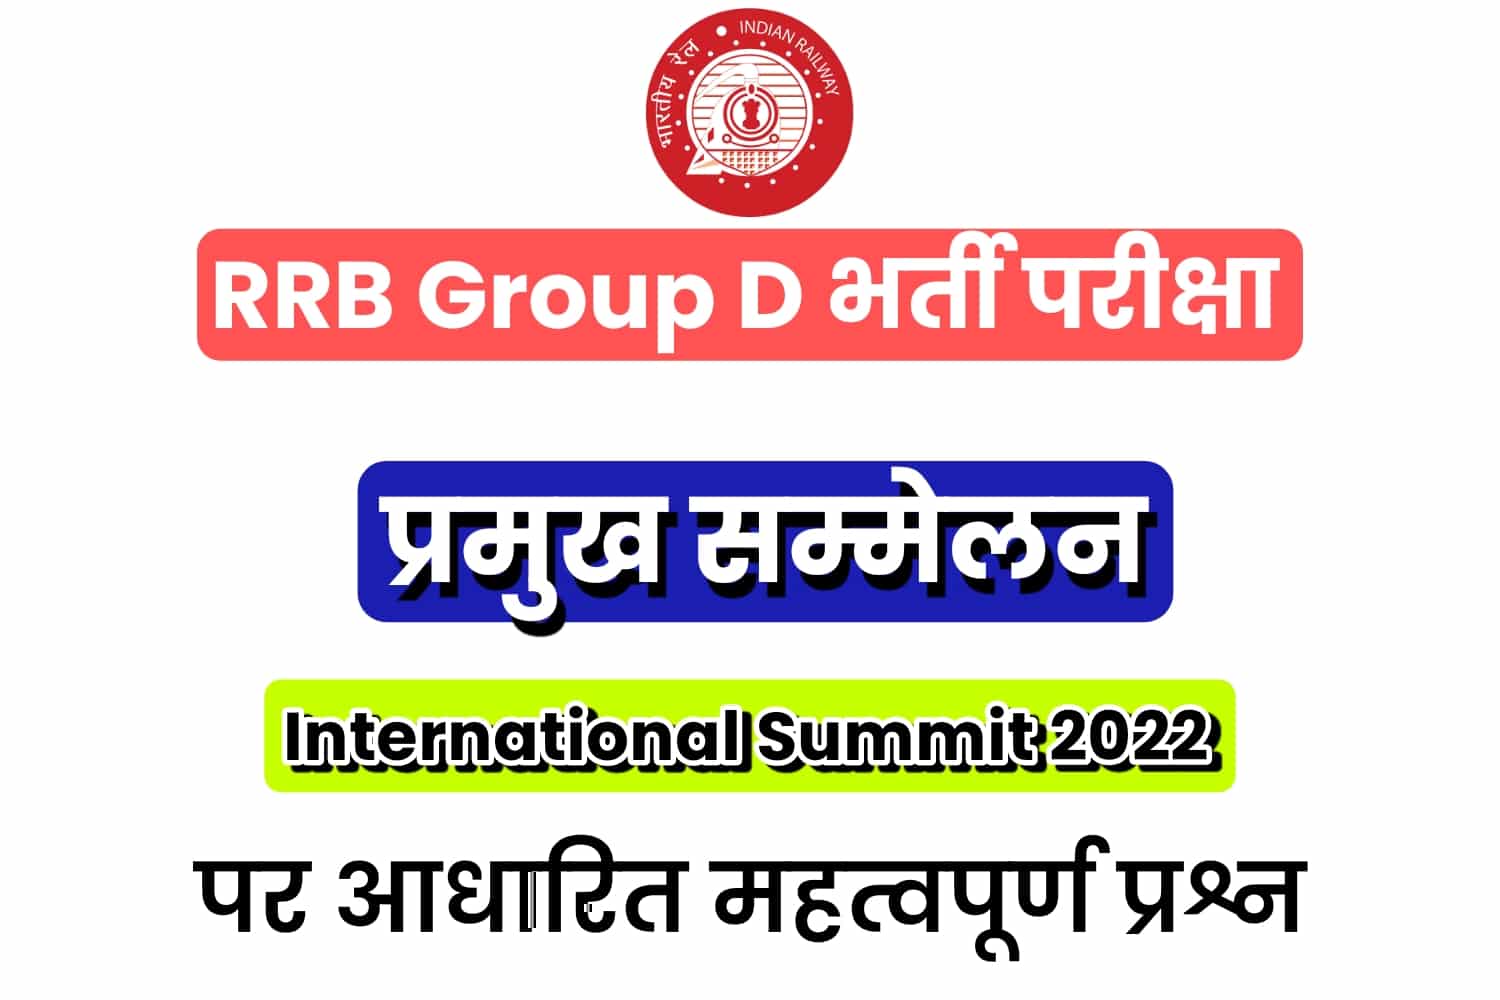 Important Summit in 2022 MCQ For RRB Group D Exam